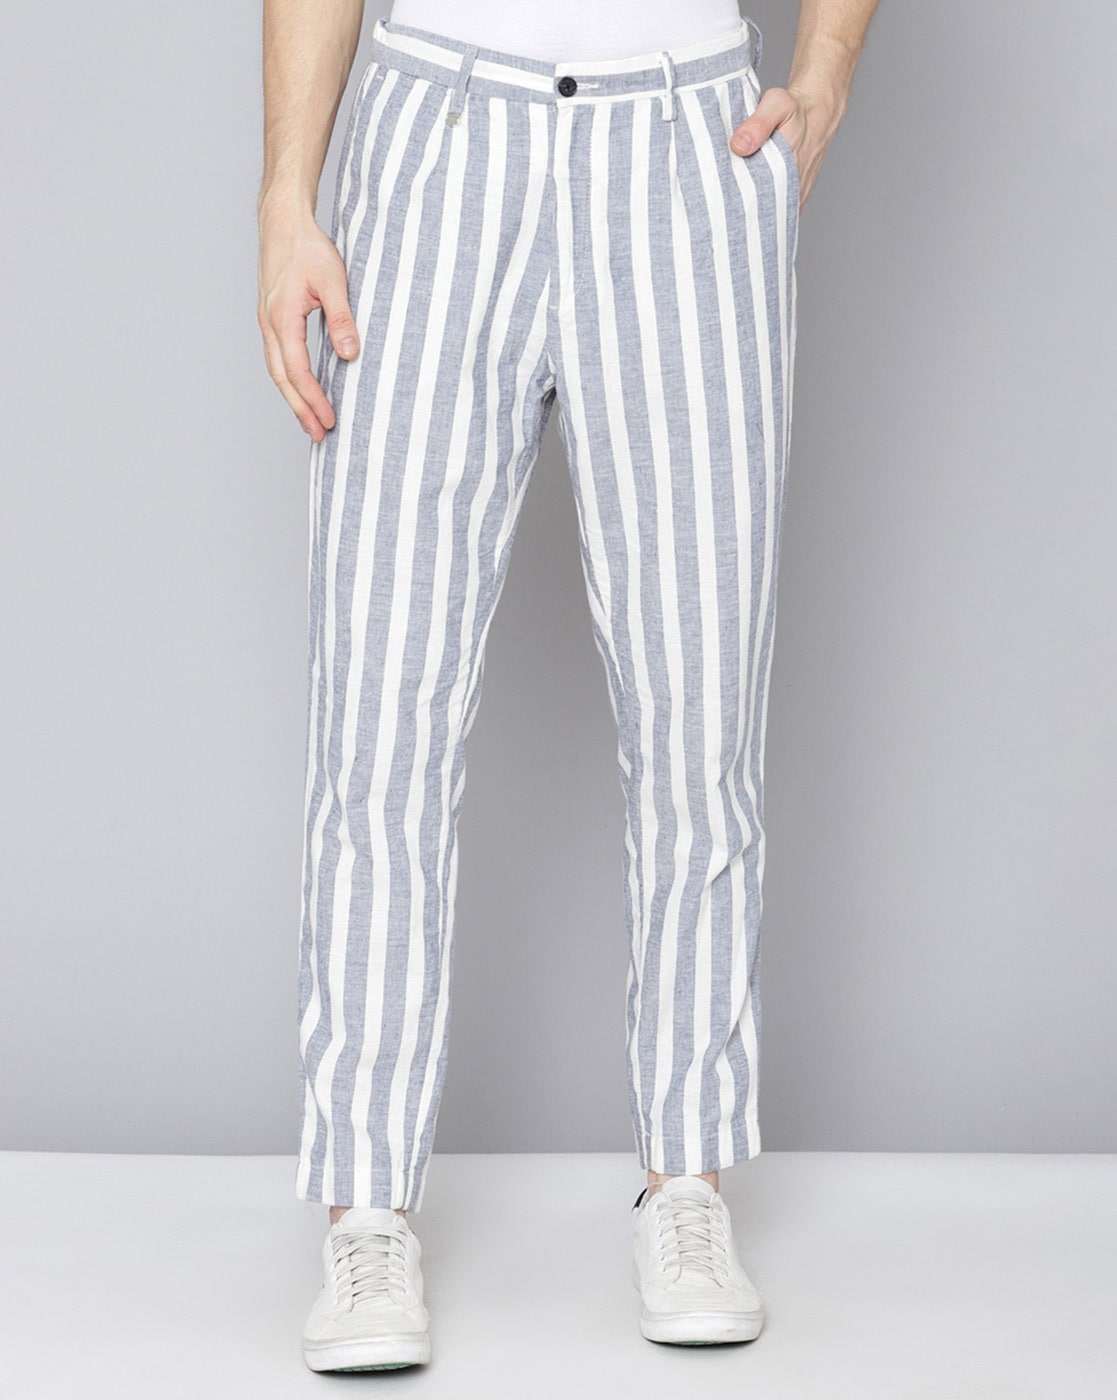 Buy Cairon Striped Formal Pants TCC1333A34 Blue at Amazonin